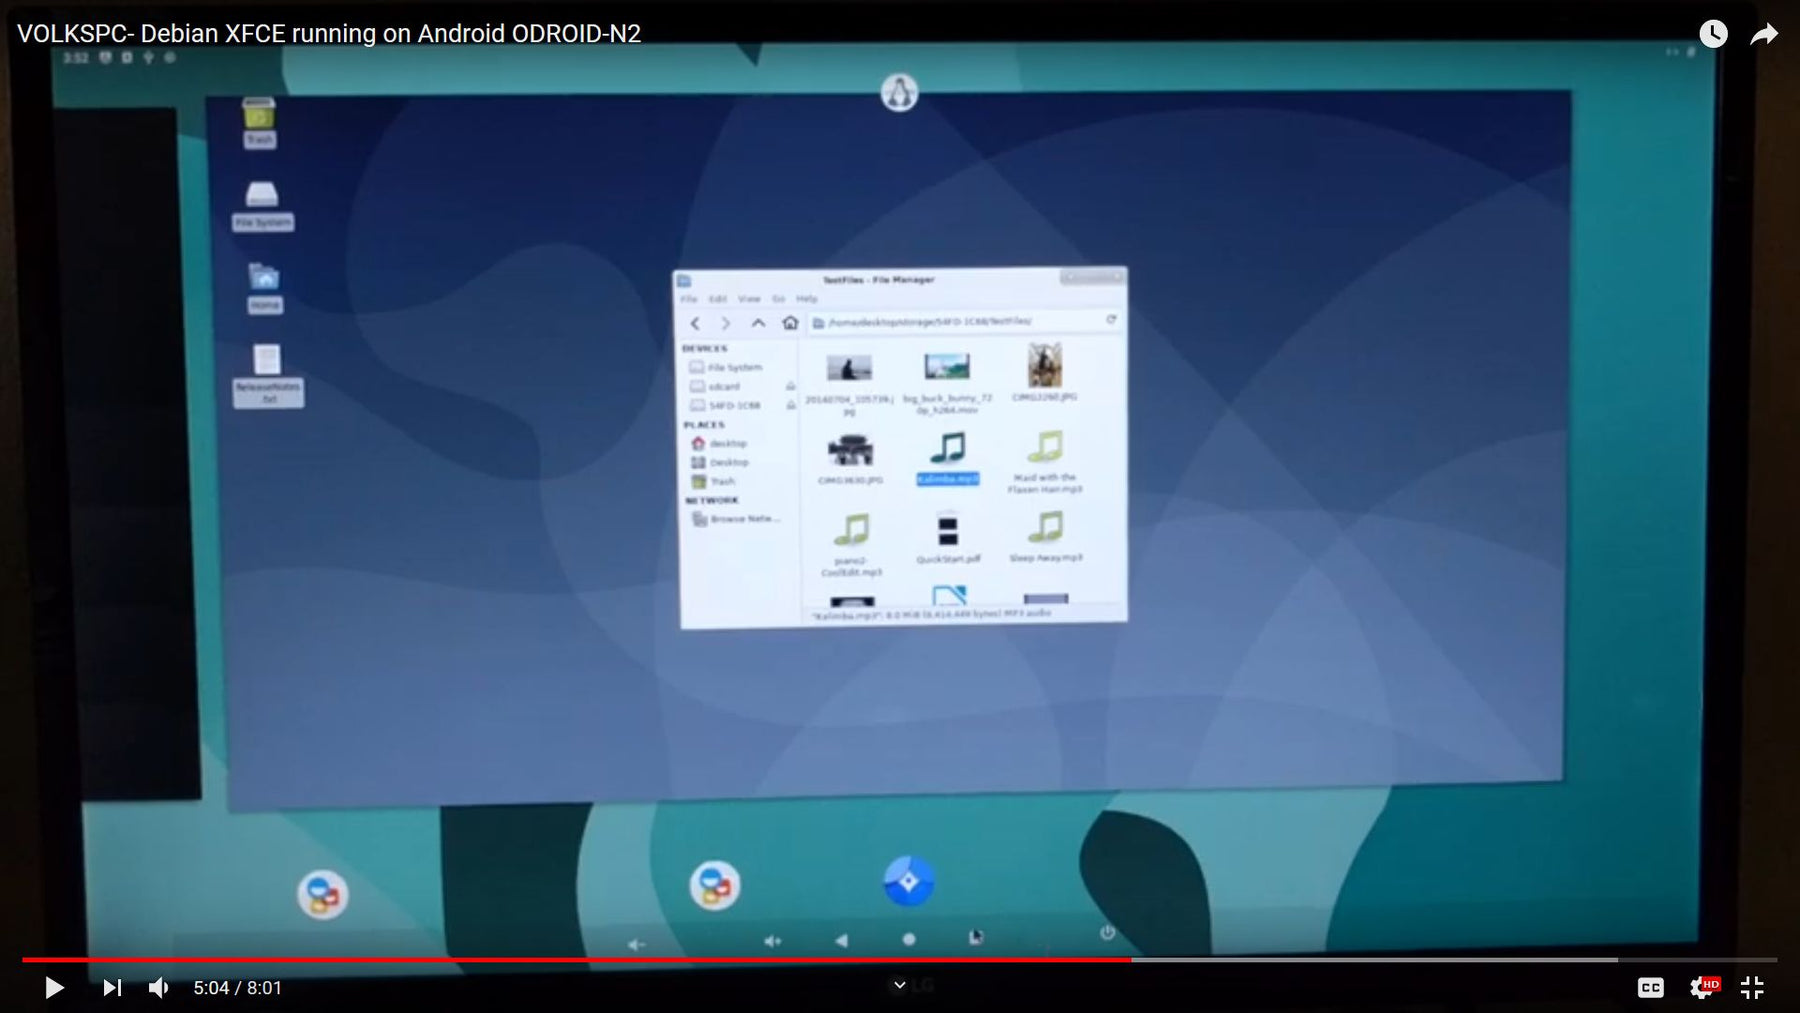 OS Releases: Debian Running on Android Devices Using VOLKSPC